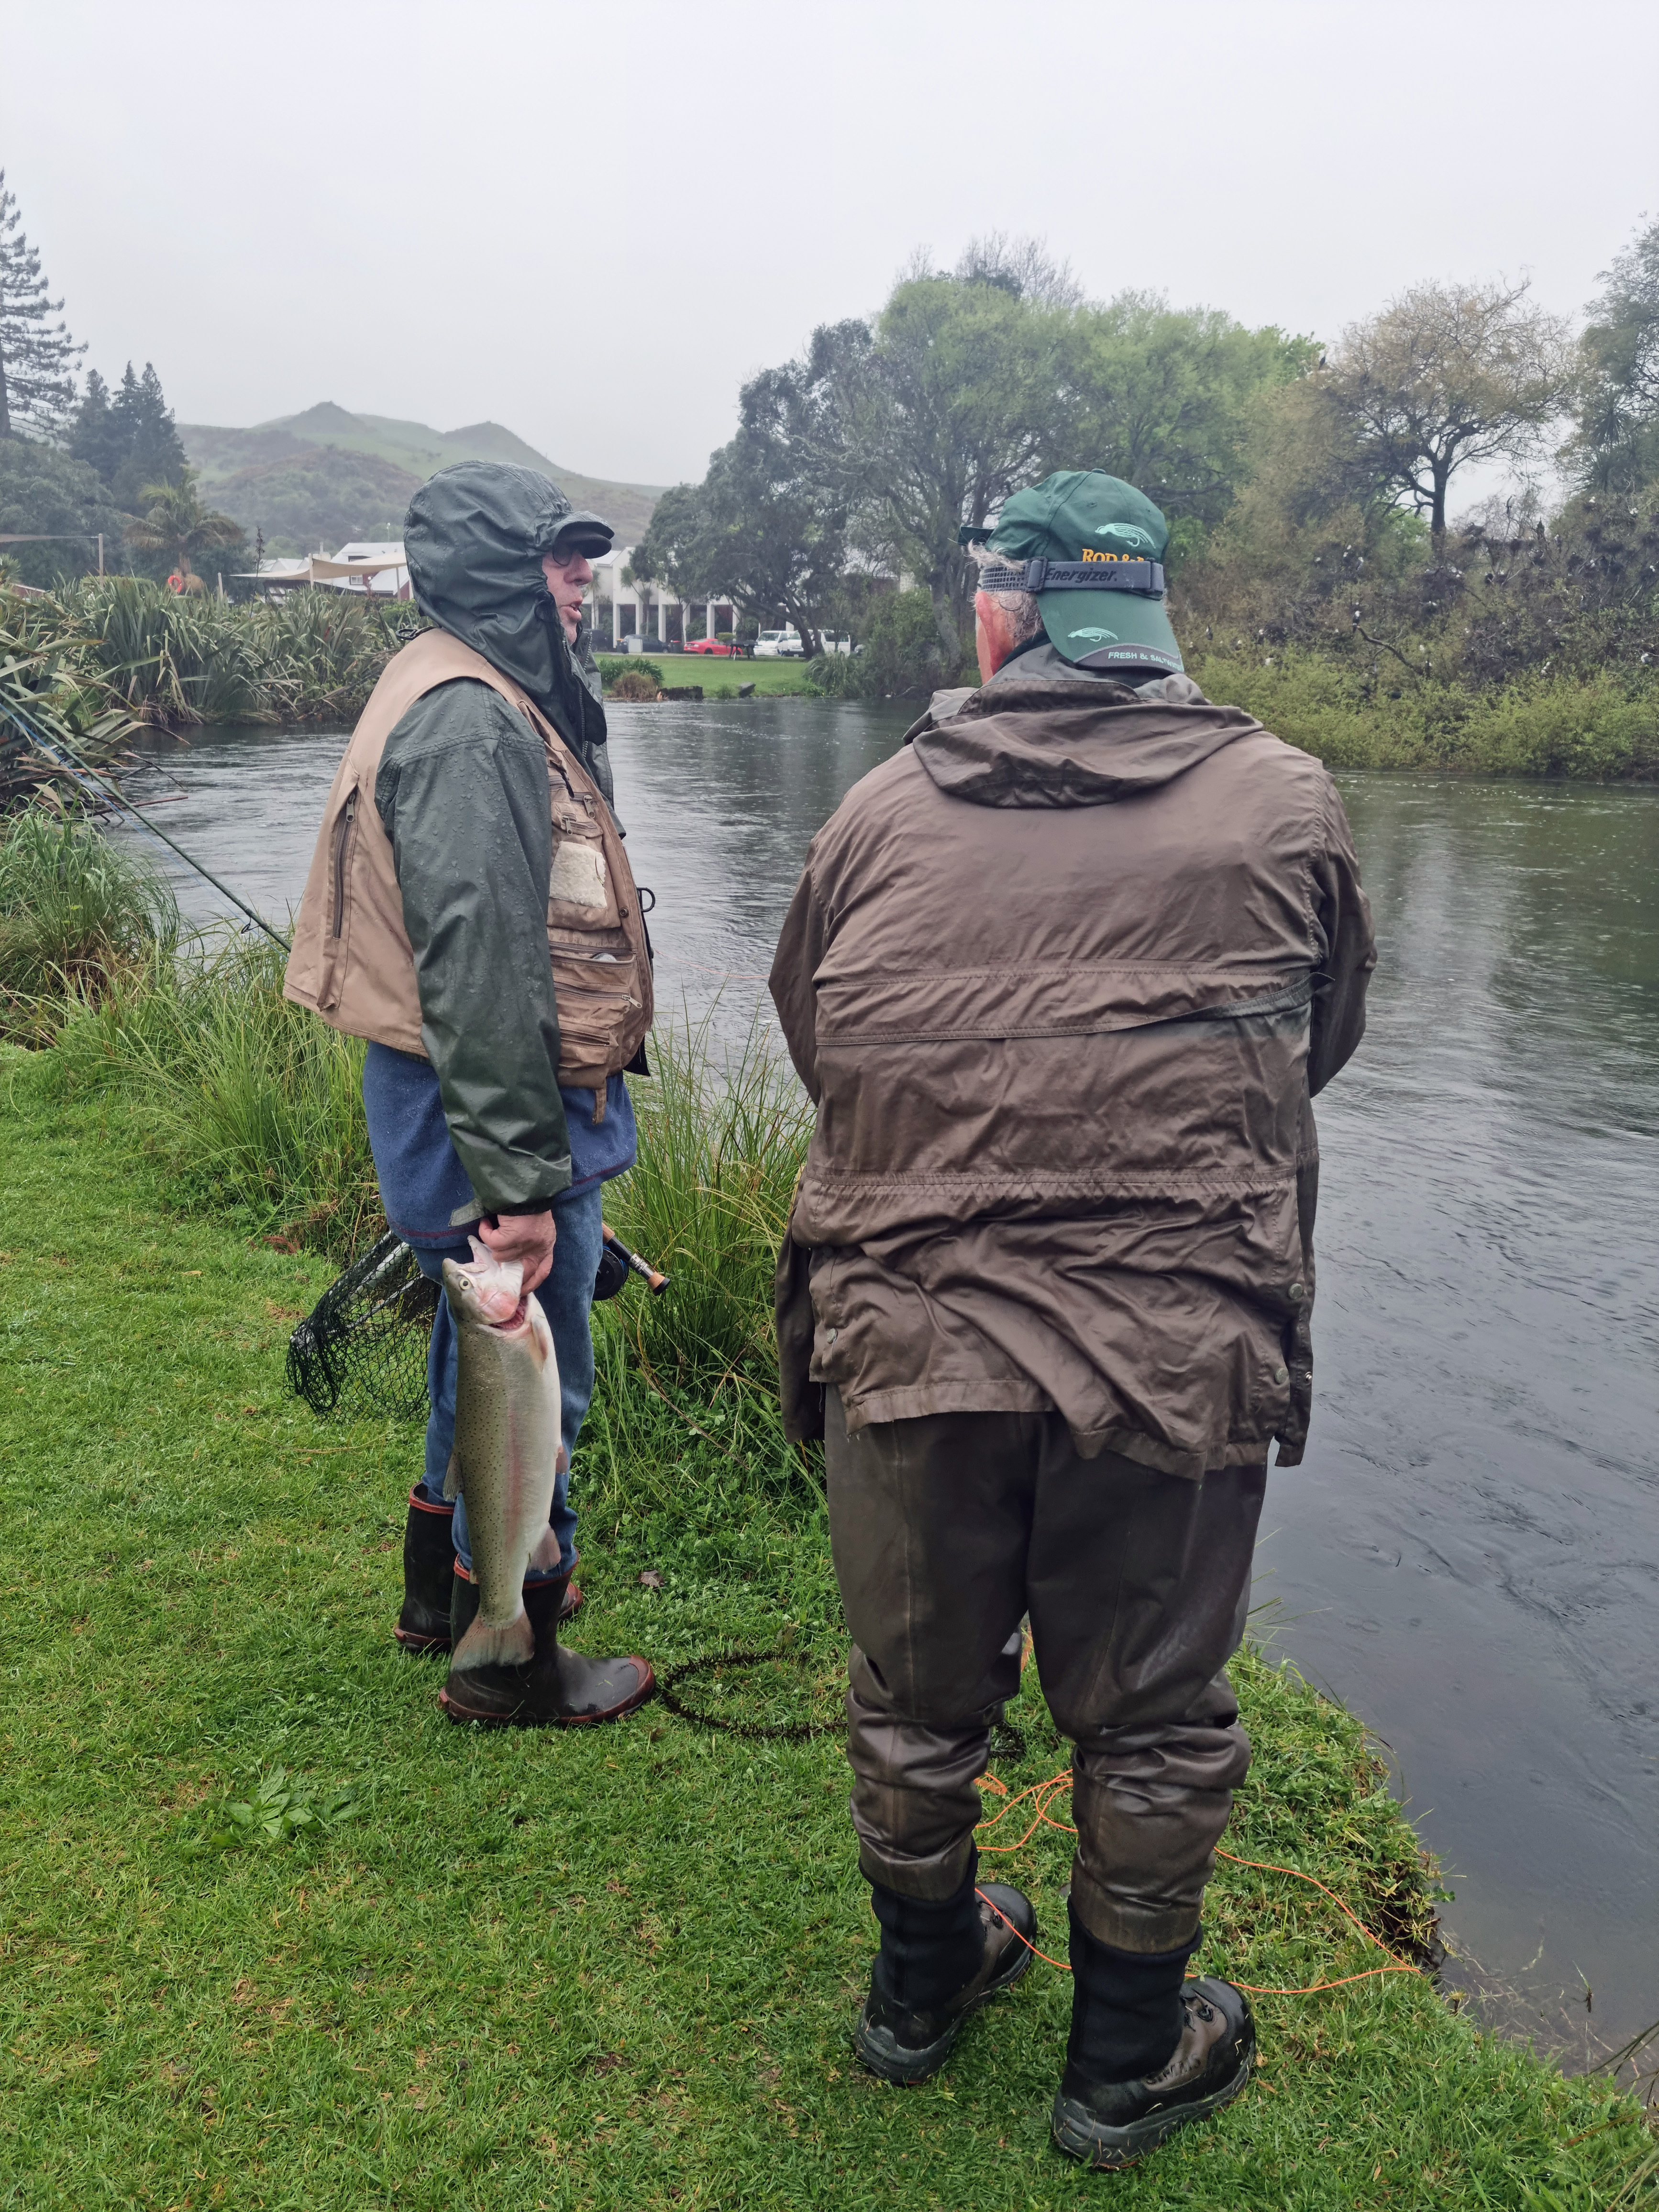 It was wet but it didnt slow the action at the Ohau Channel3